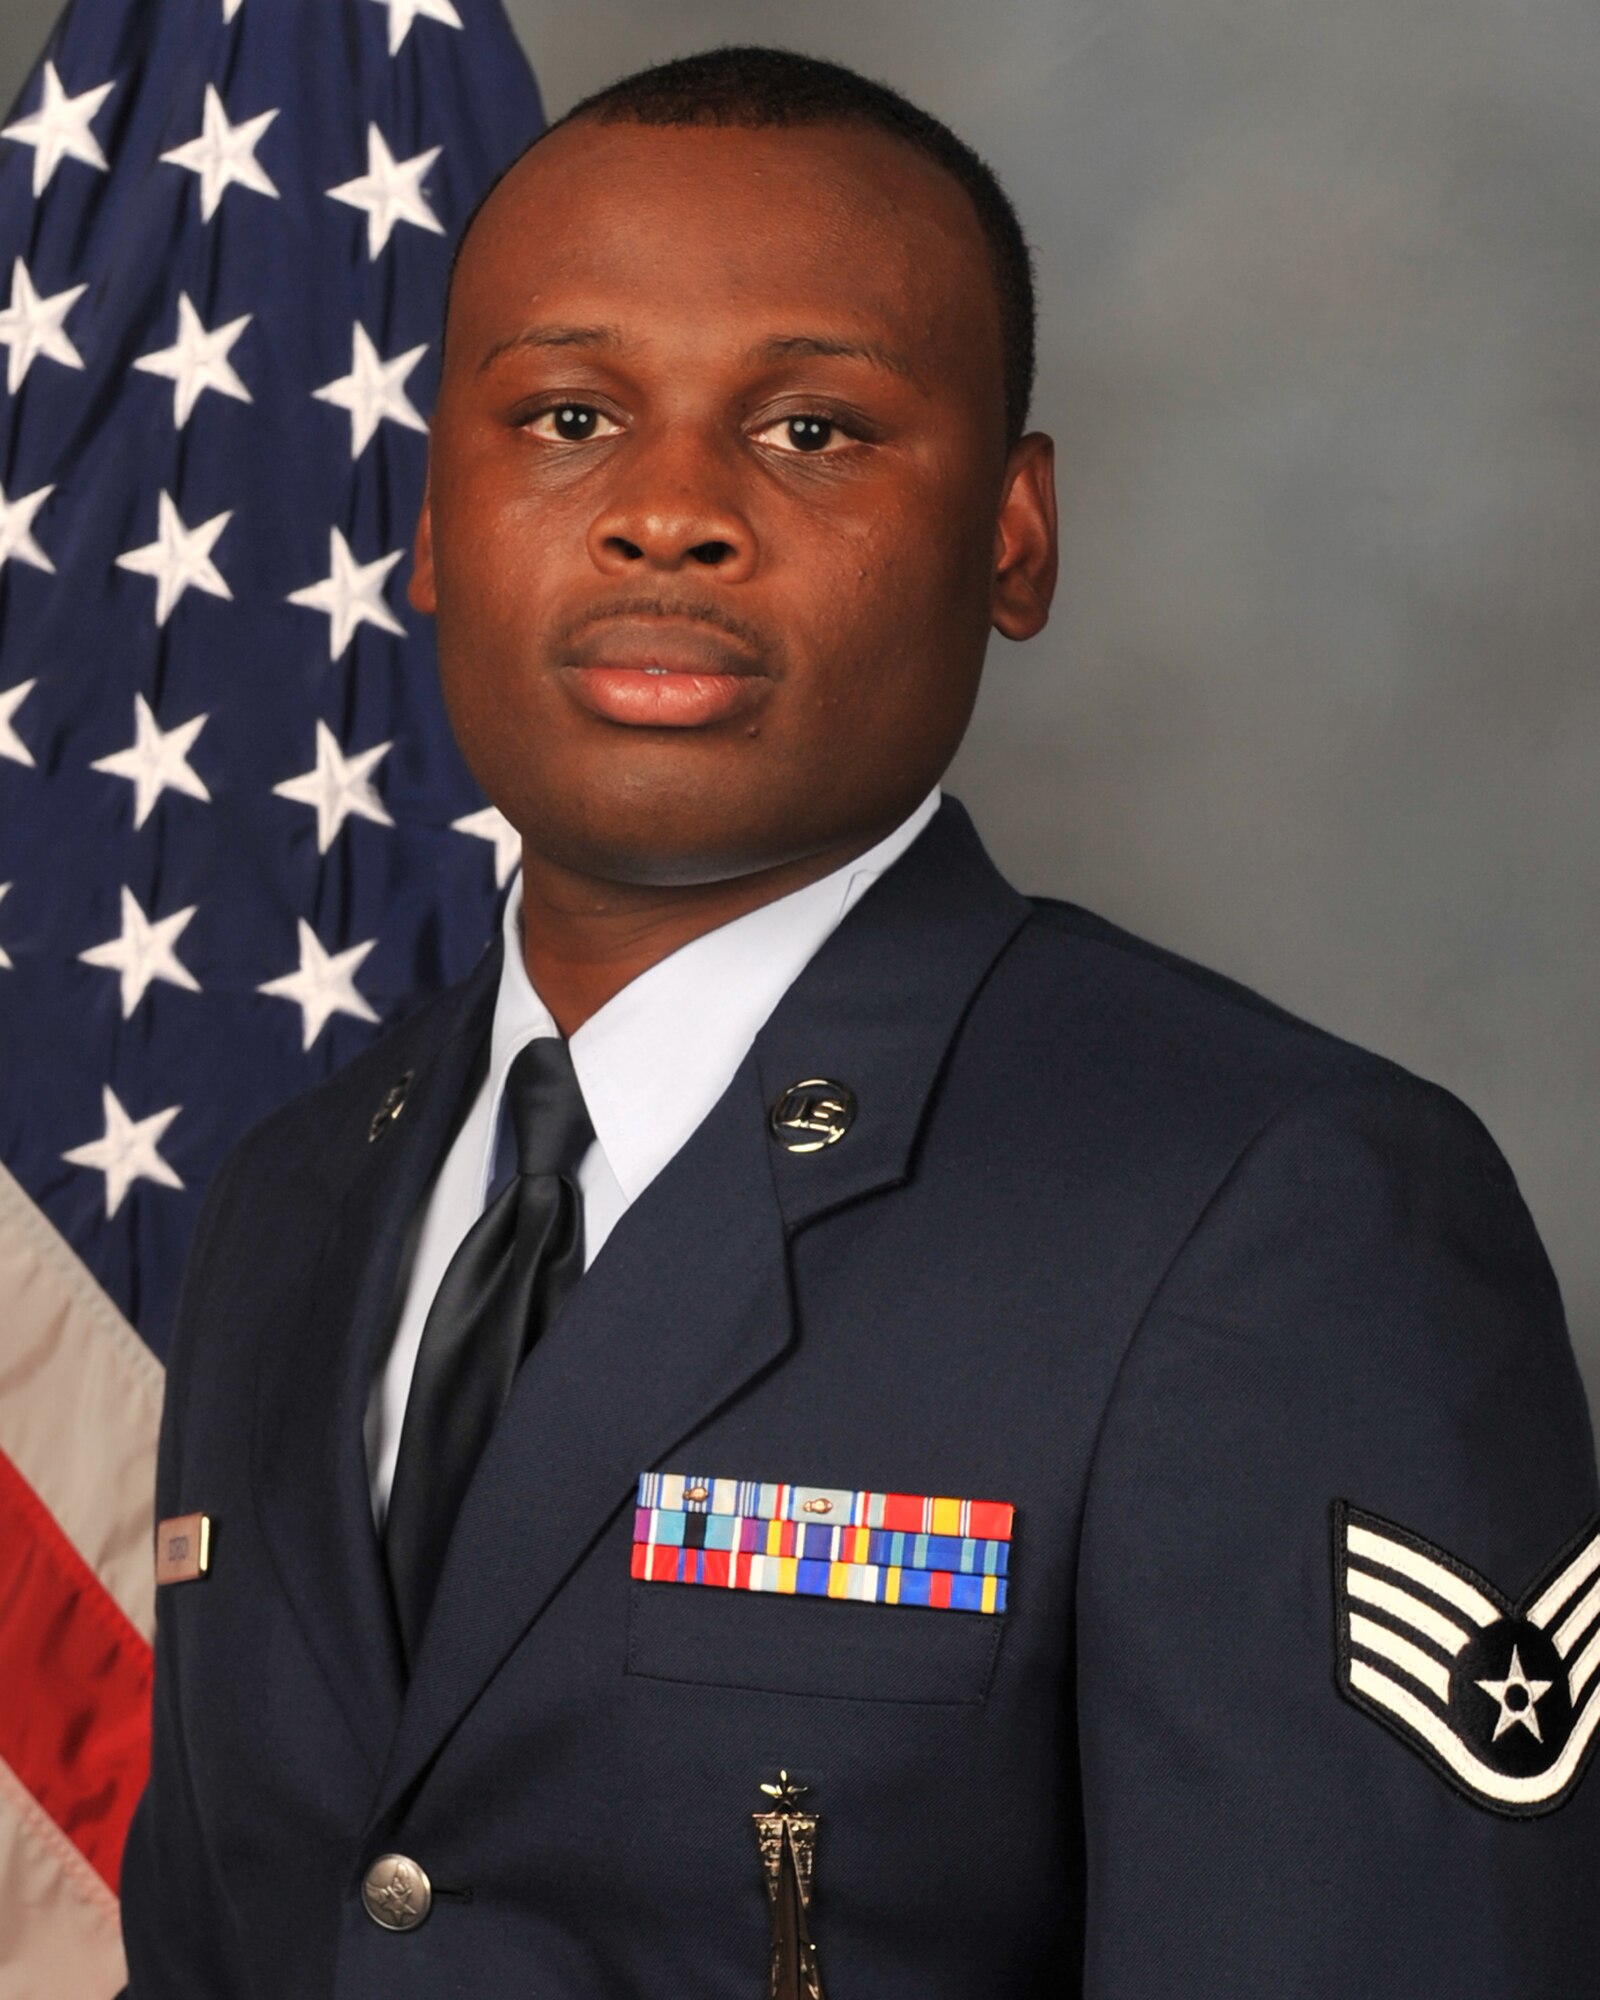 Staff Sgt. Derrick J. Gordon, 2nd Munitions Squadron, 2nd Maintenance Group, 2nd Bomb Wing, Barksdale AFB, La., received the Ground Safety Well Done Award, presented in recognition of non-safety Airmen who make a significant contribution that affects overall mishap prevention activities in ground and weapons safety. (U.S. Air Force photo)